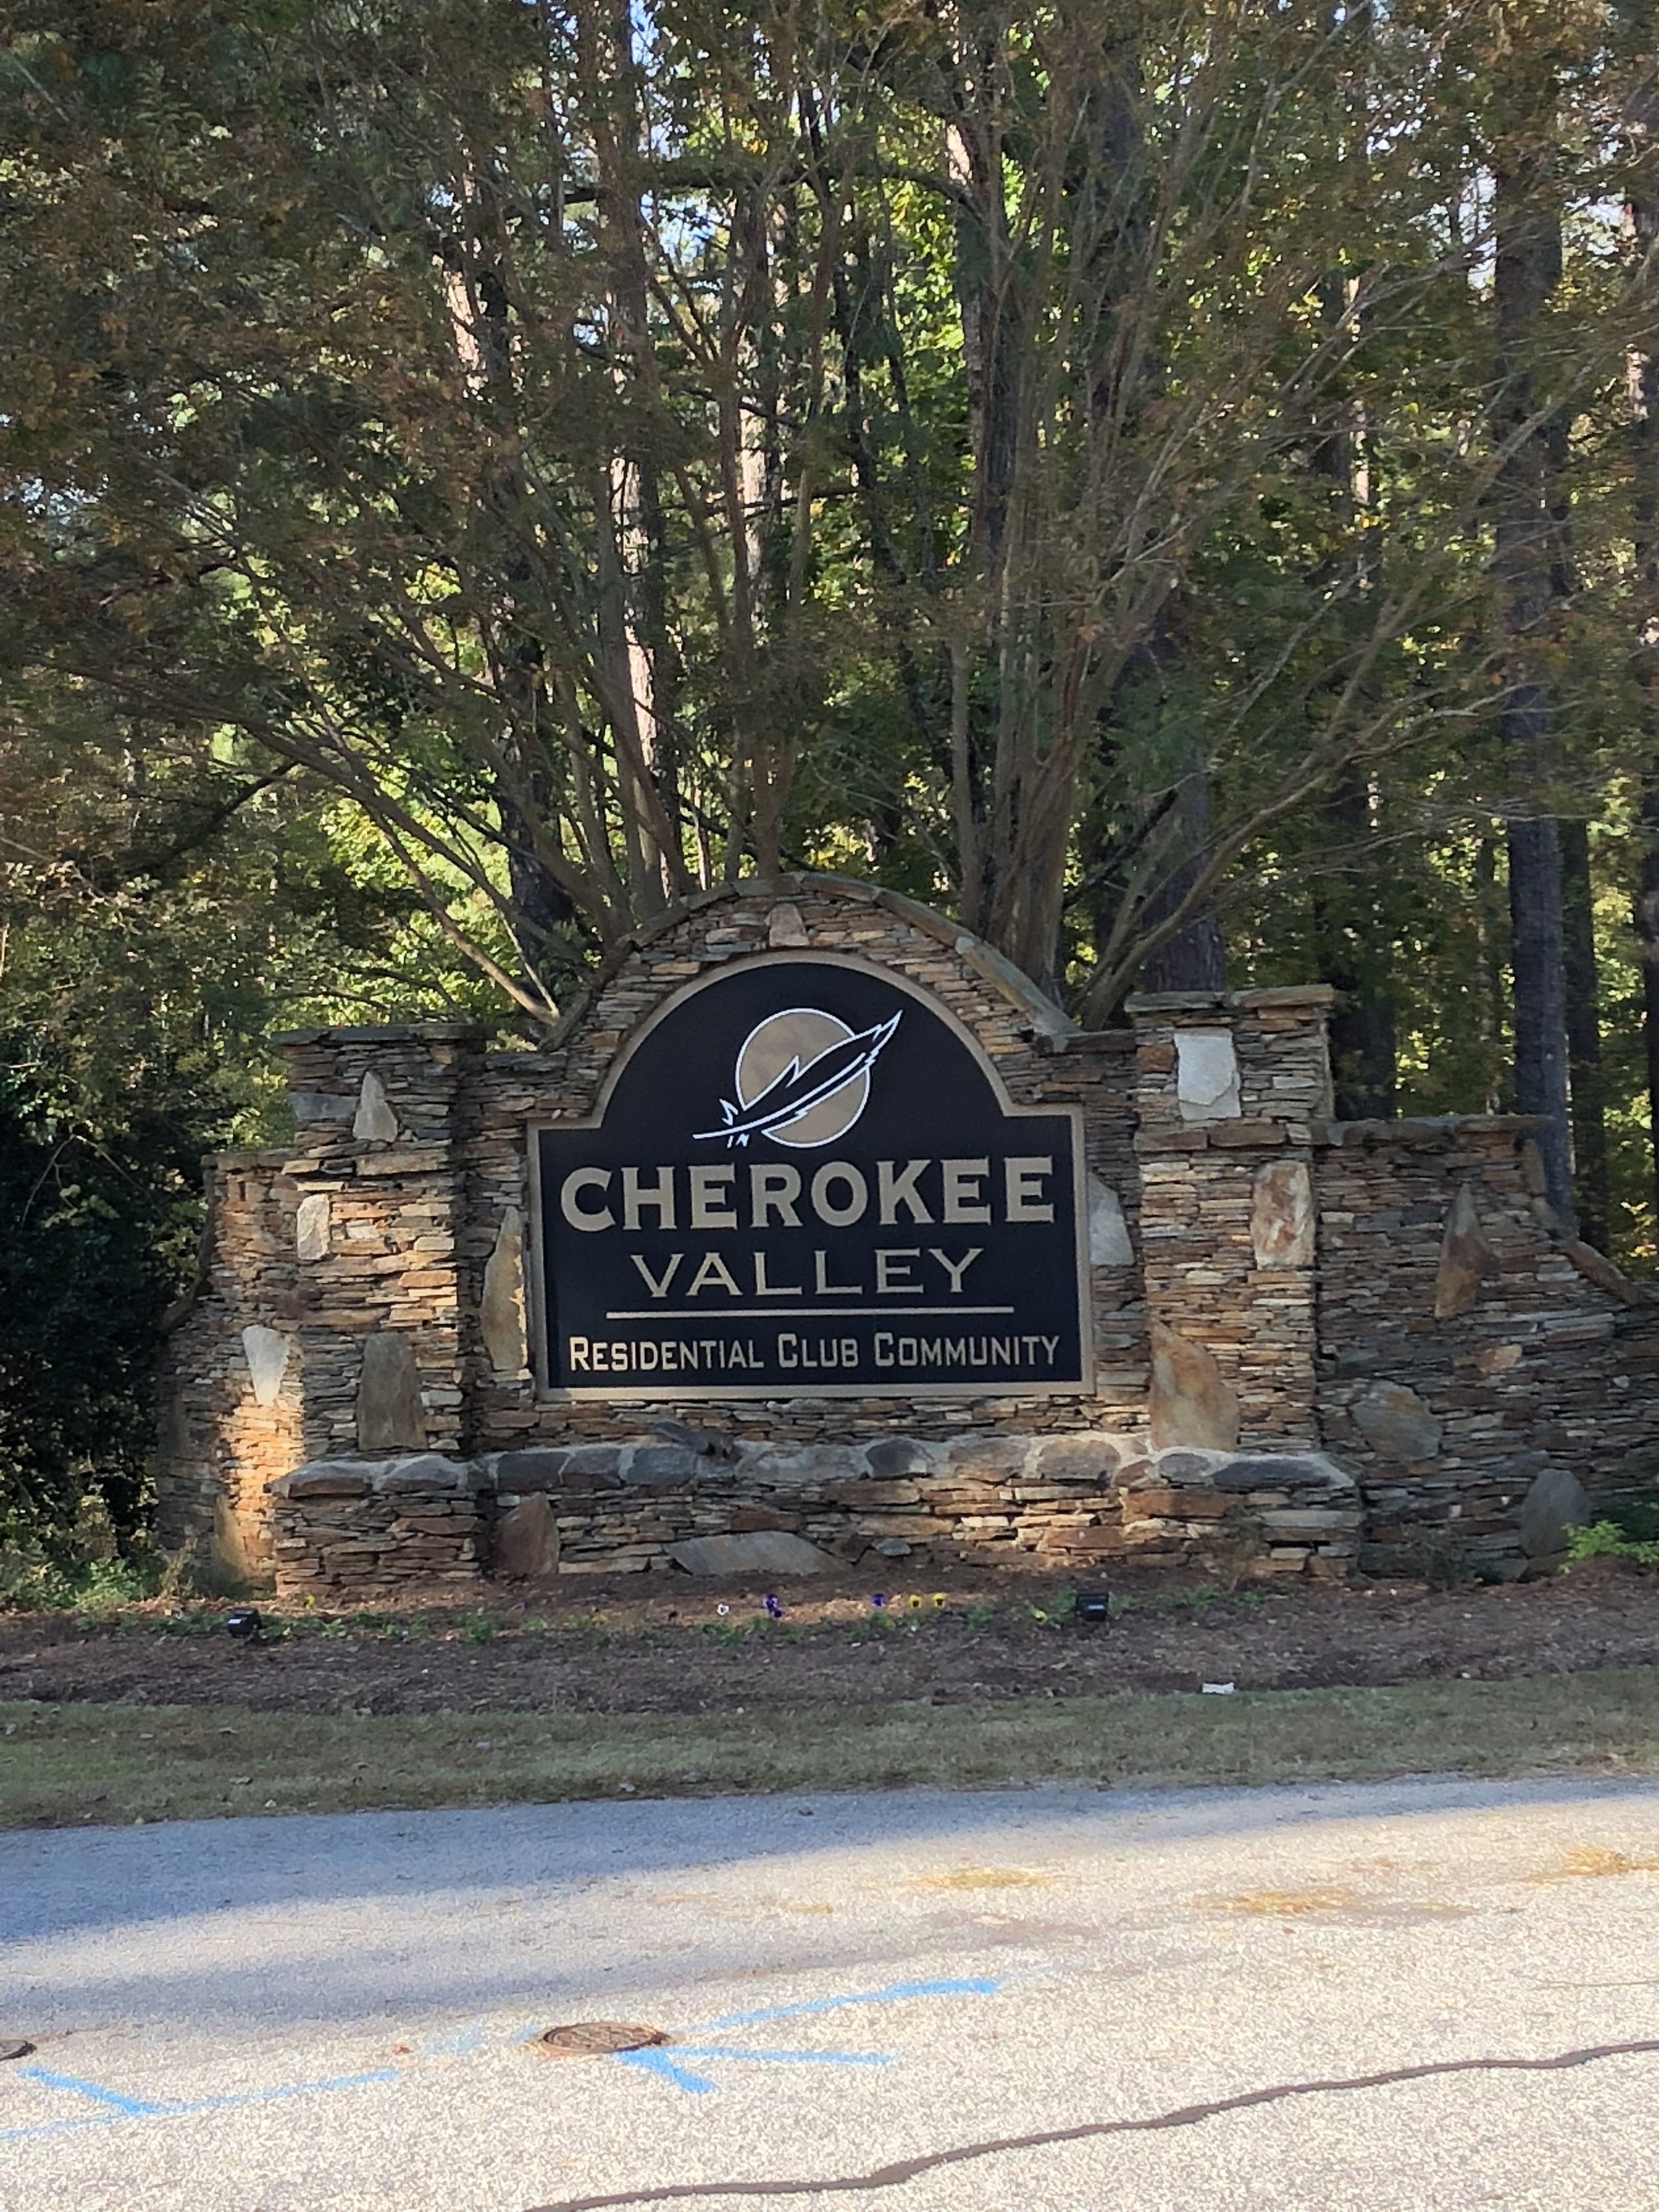 Road sign of the Cherokee Valley Residential Country Club.